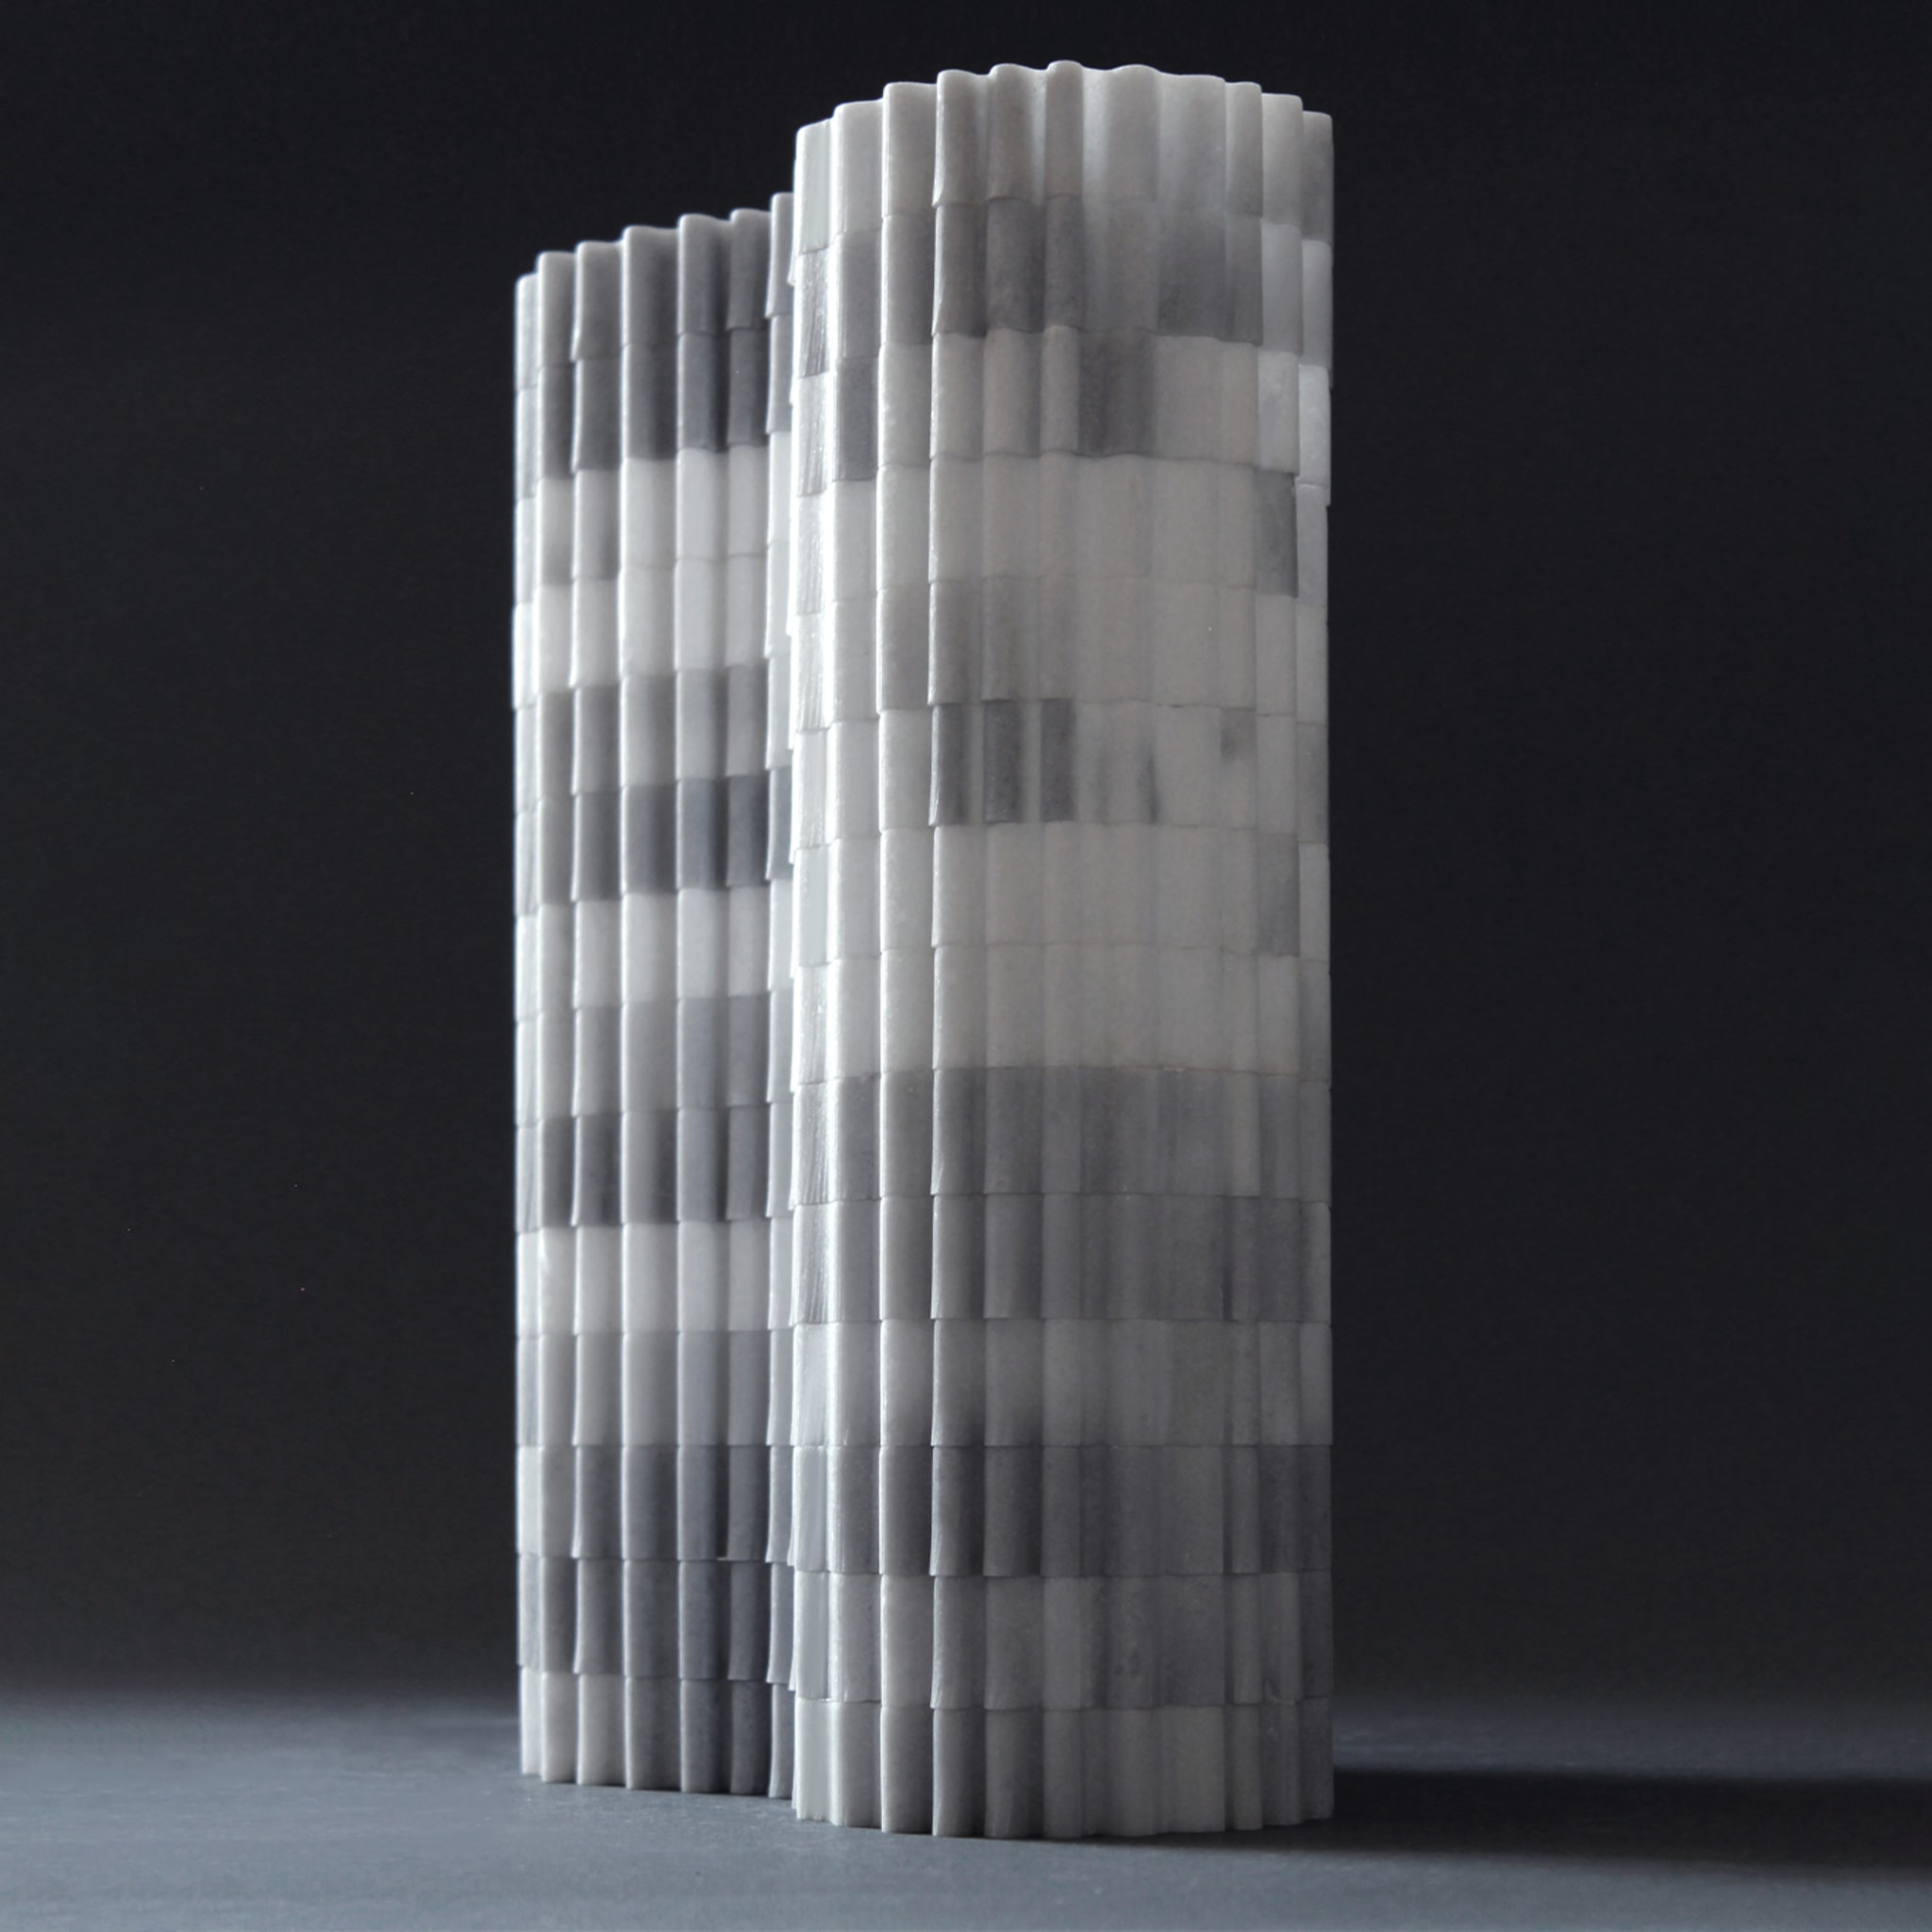 Stripes Vase Olimpic White Marble #1 by Paolo Ulian - Alternative view 2